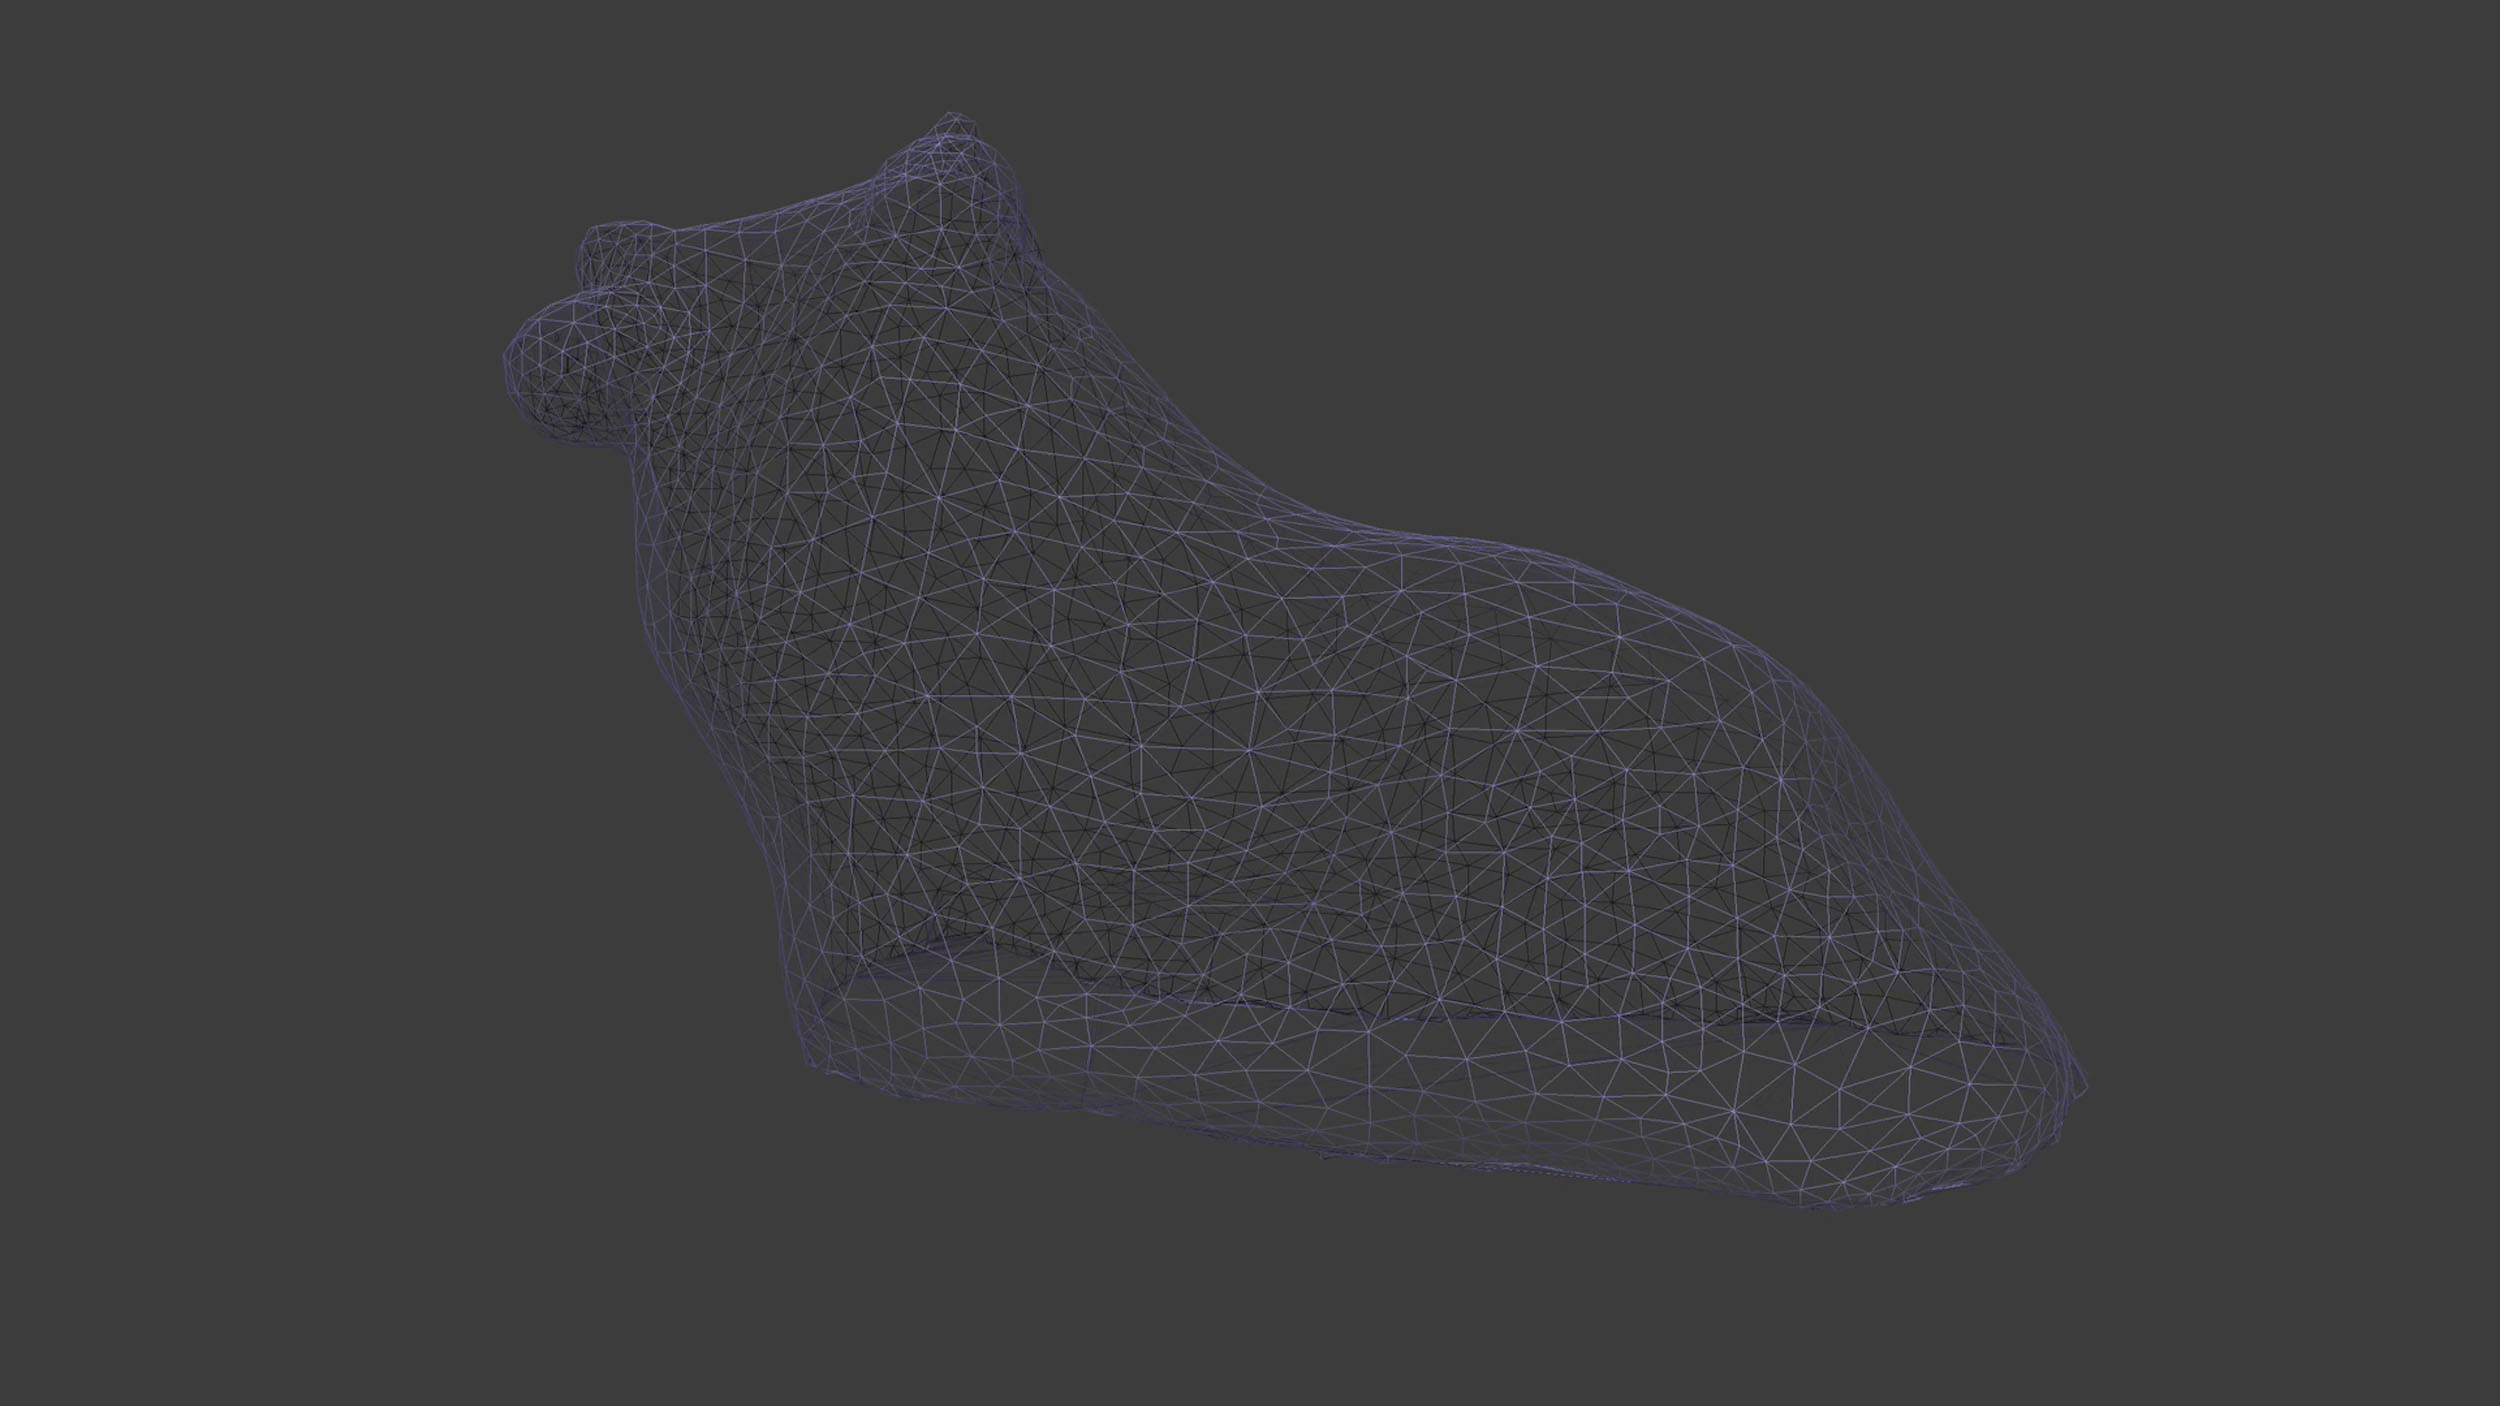 Wireframe: cleaned up and with reduced polygon count